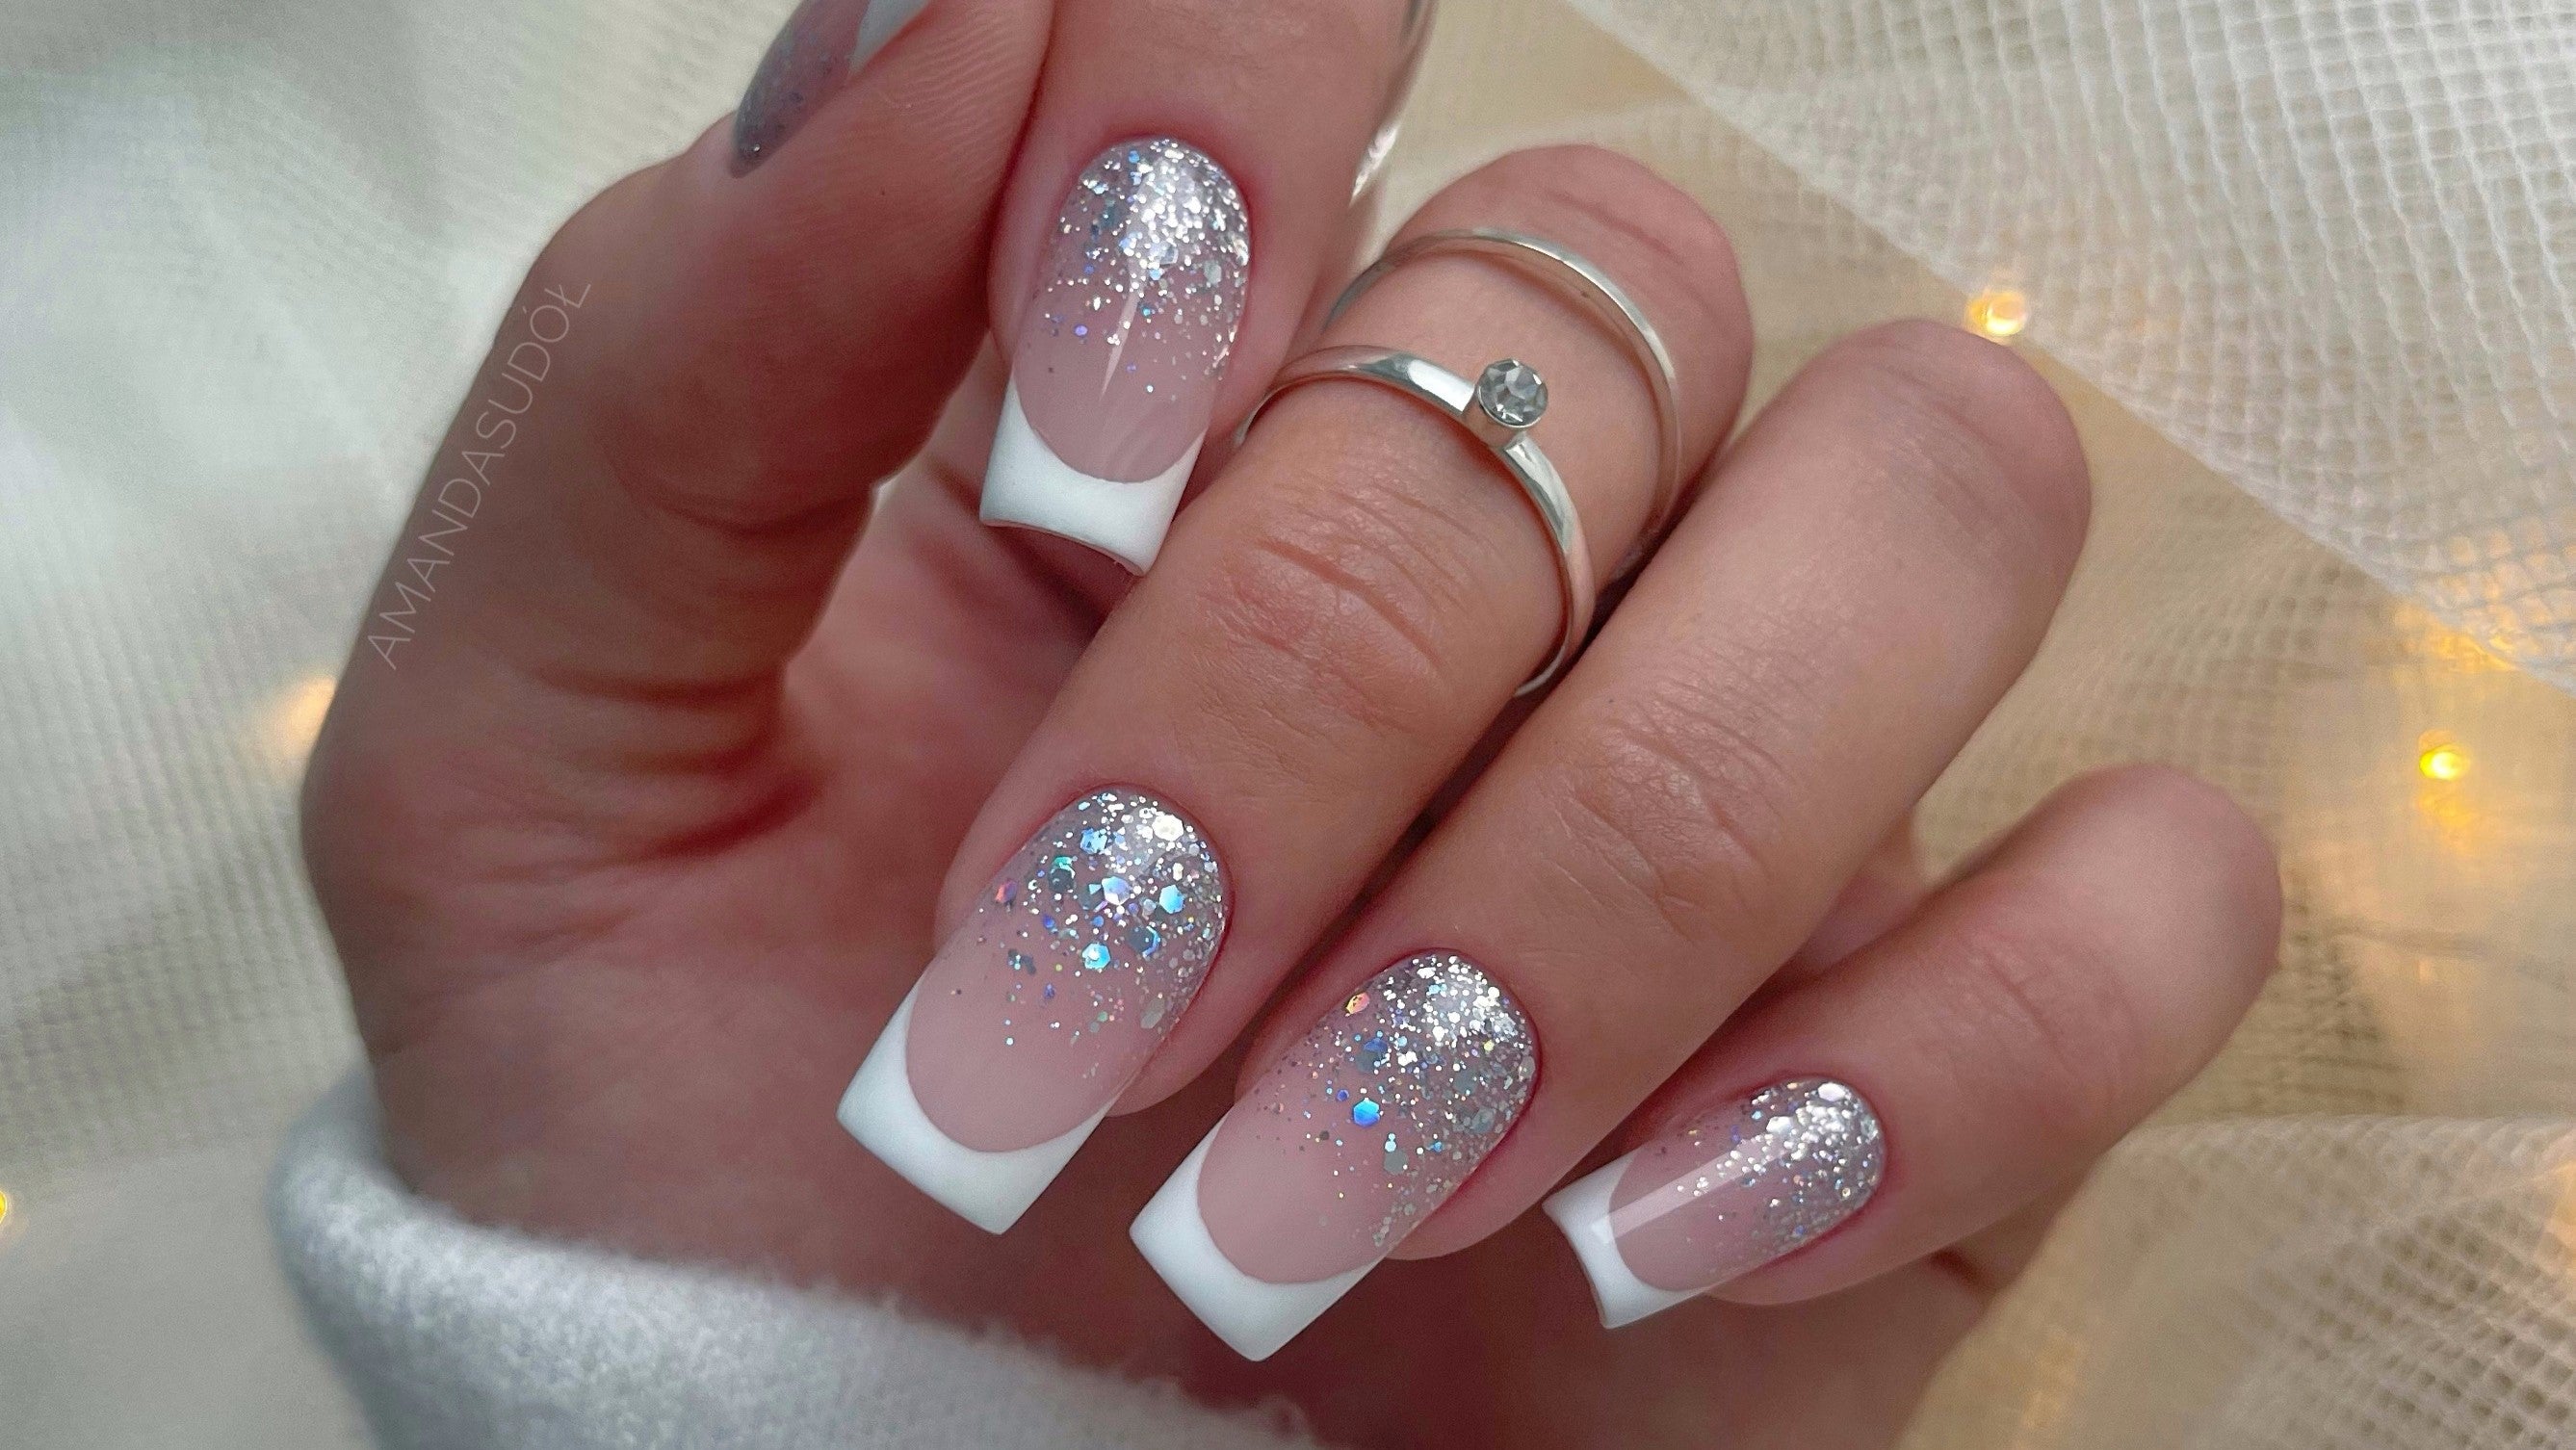 2. Elegant Gel Nail Design for Any Occasion - wide 5